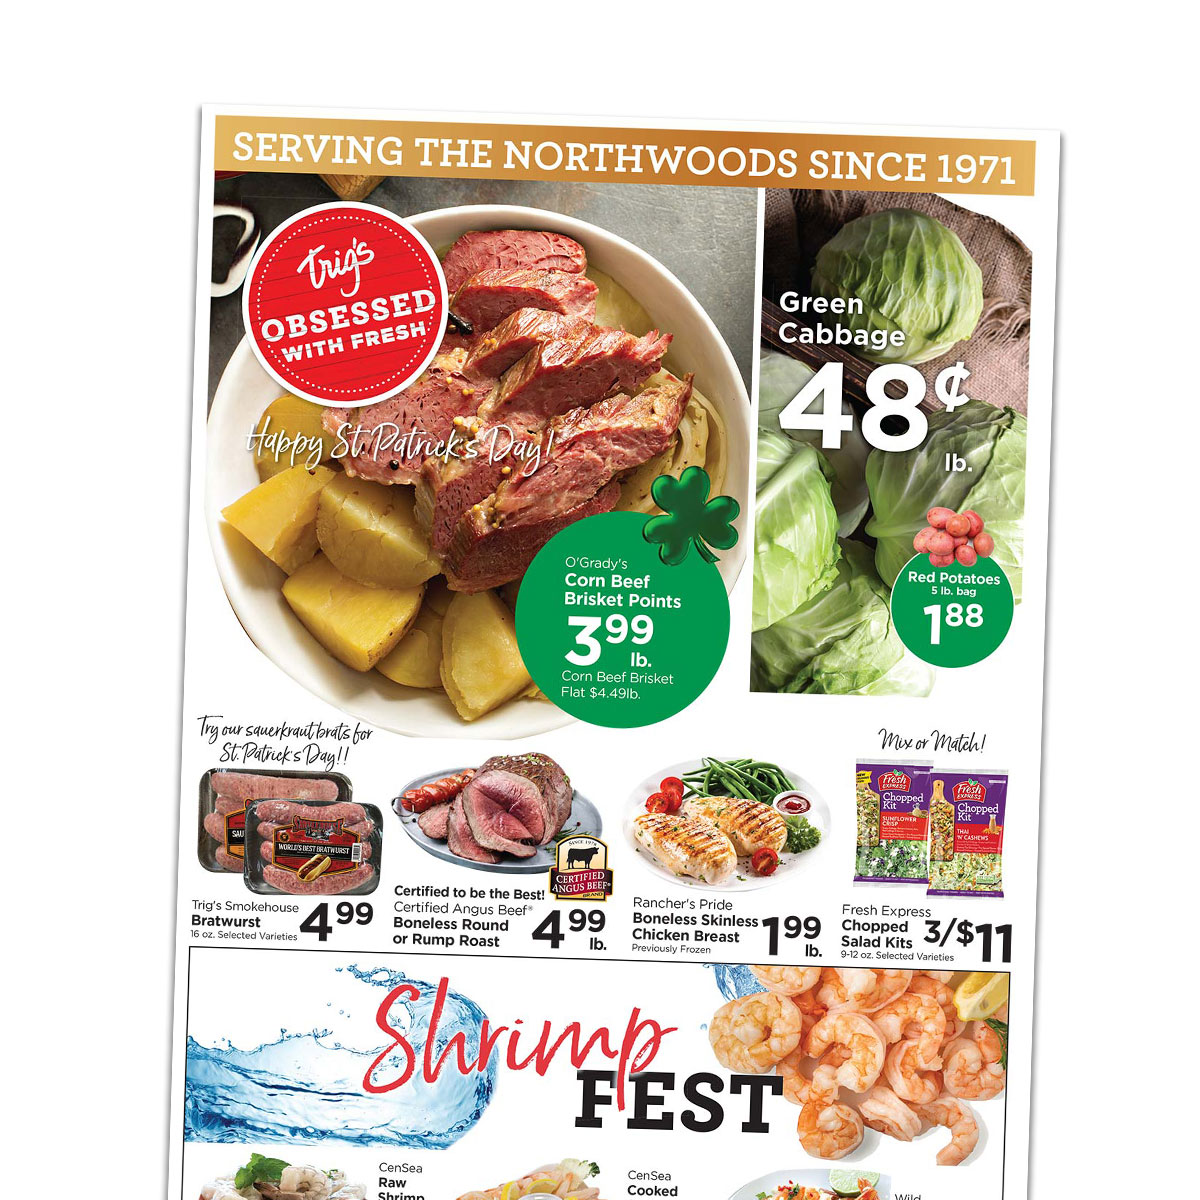 Click this image to view our full Weekly Ad for 3/8 - 3/14/2023